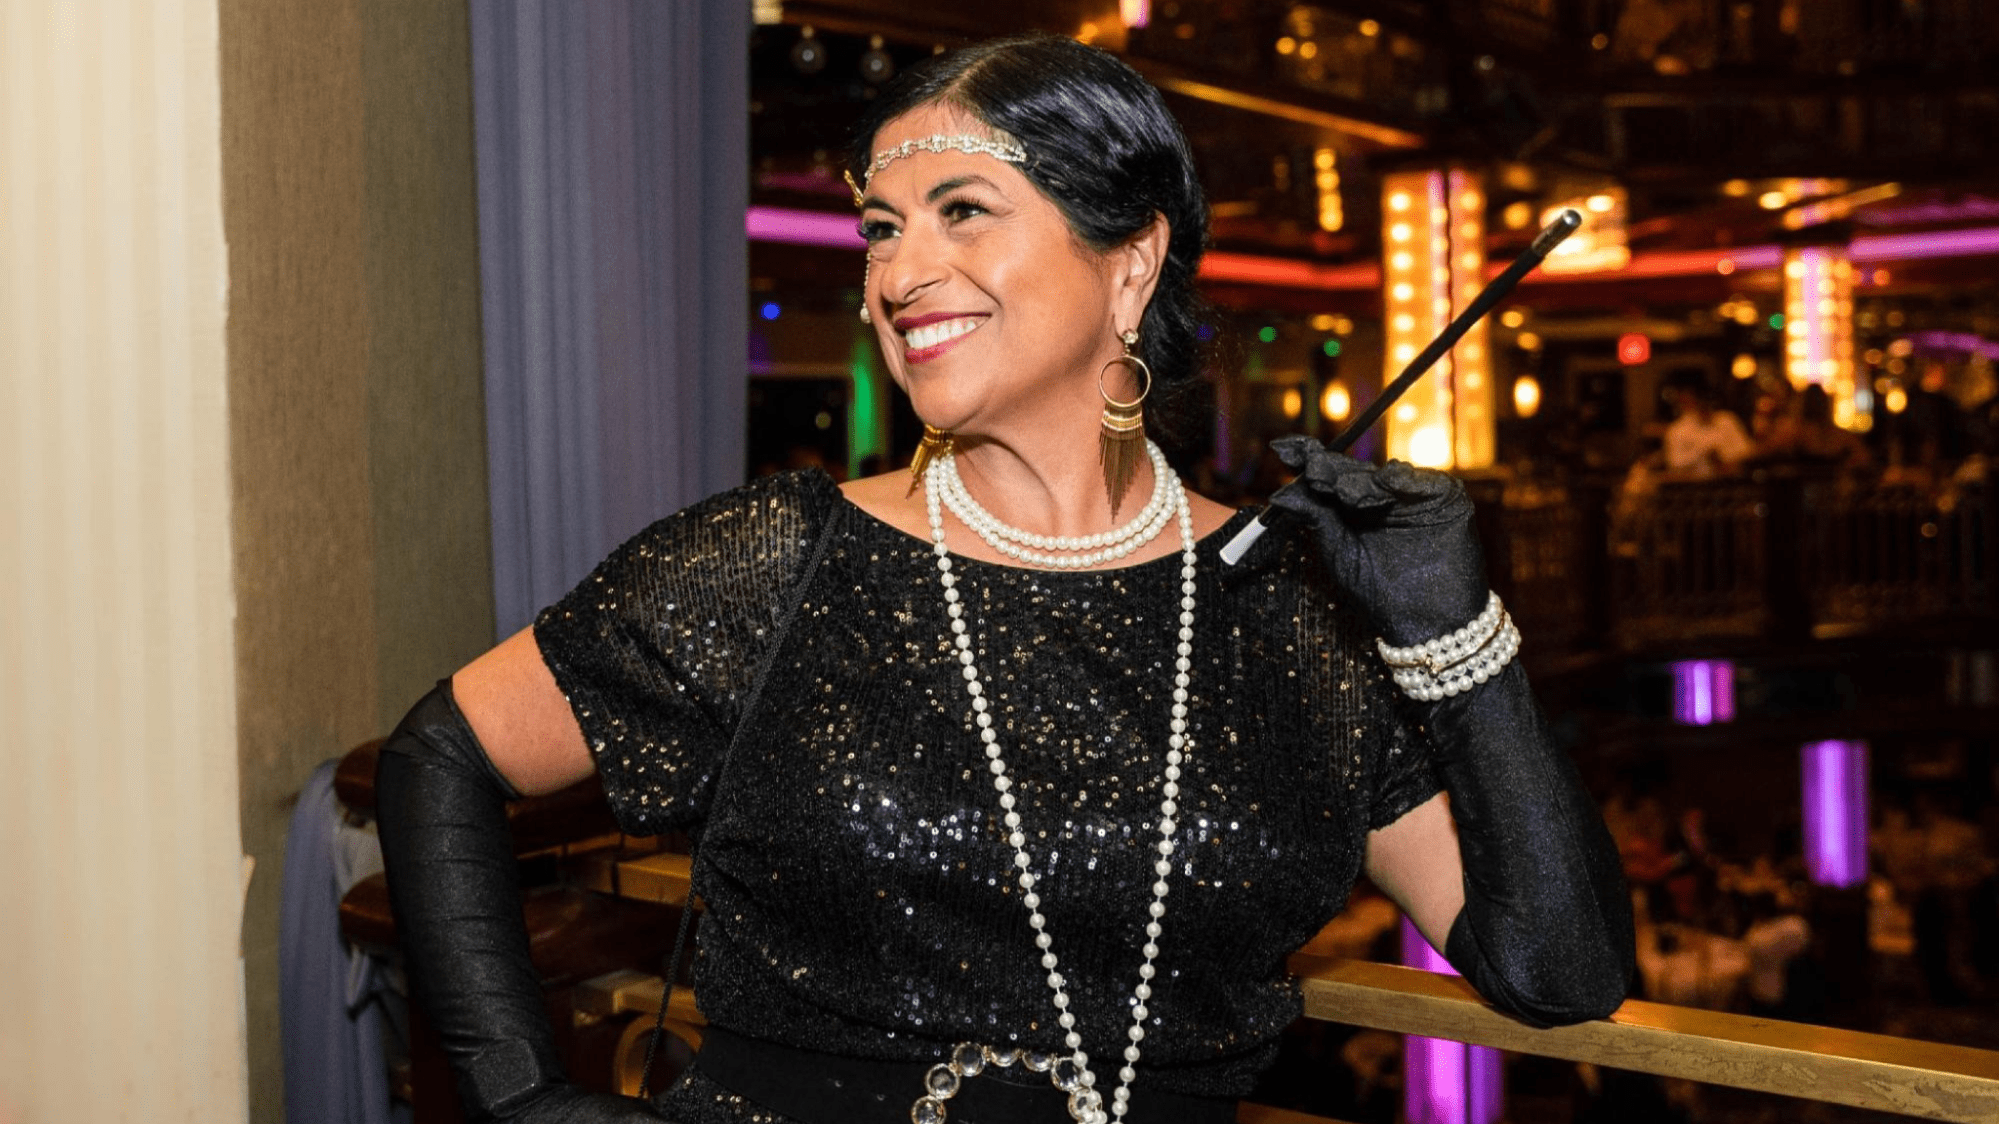 Woman dressed in flapper outfit smiles at party